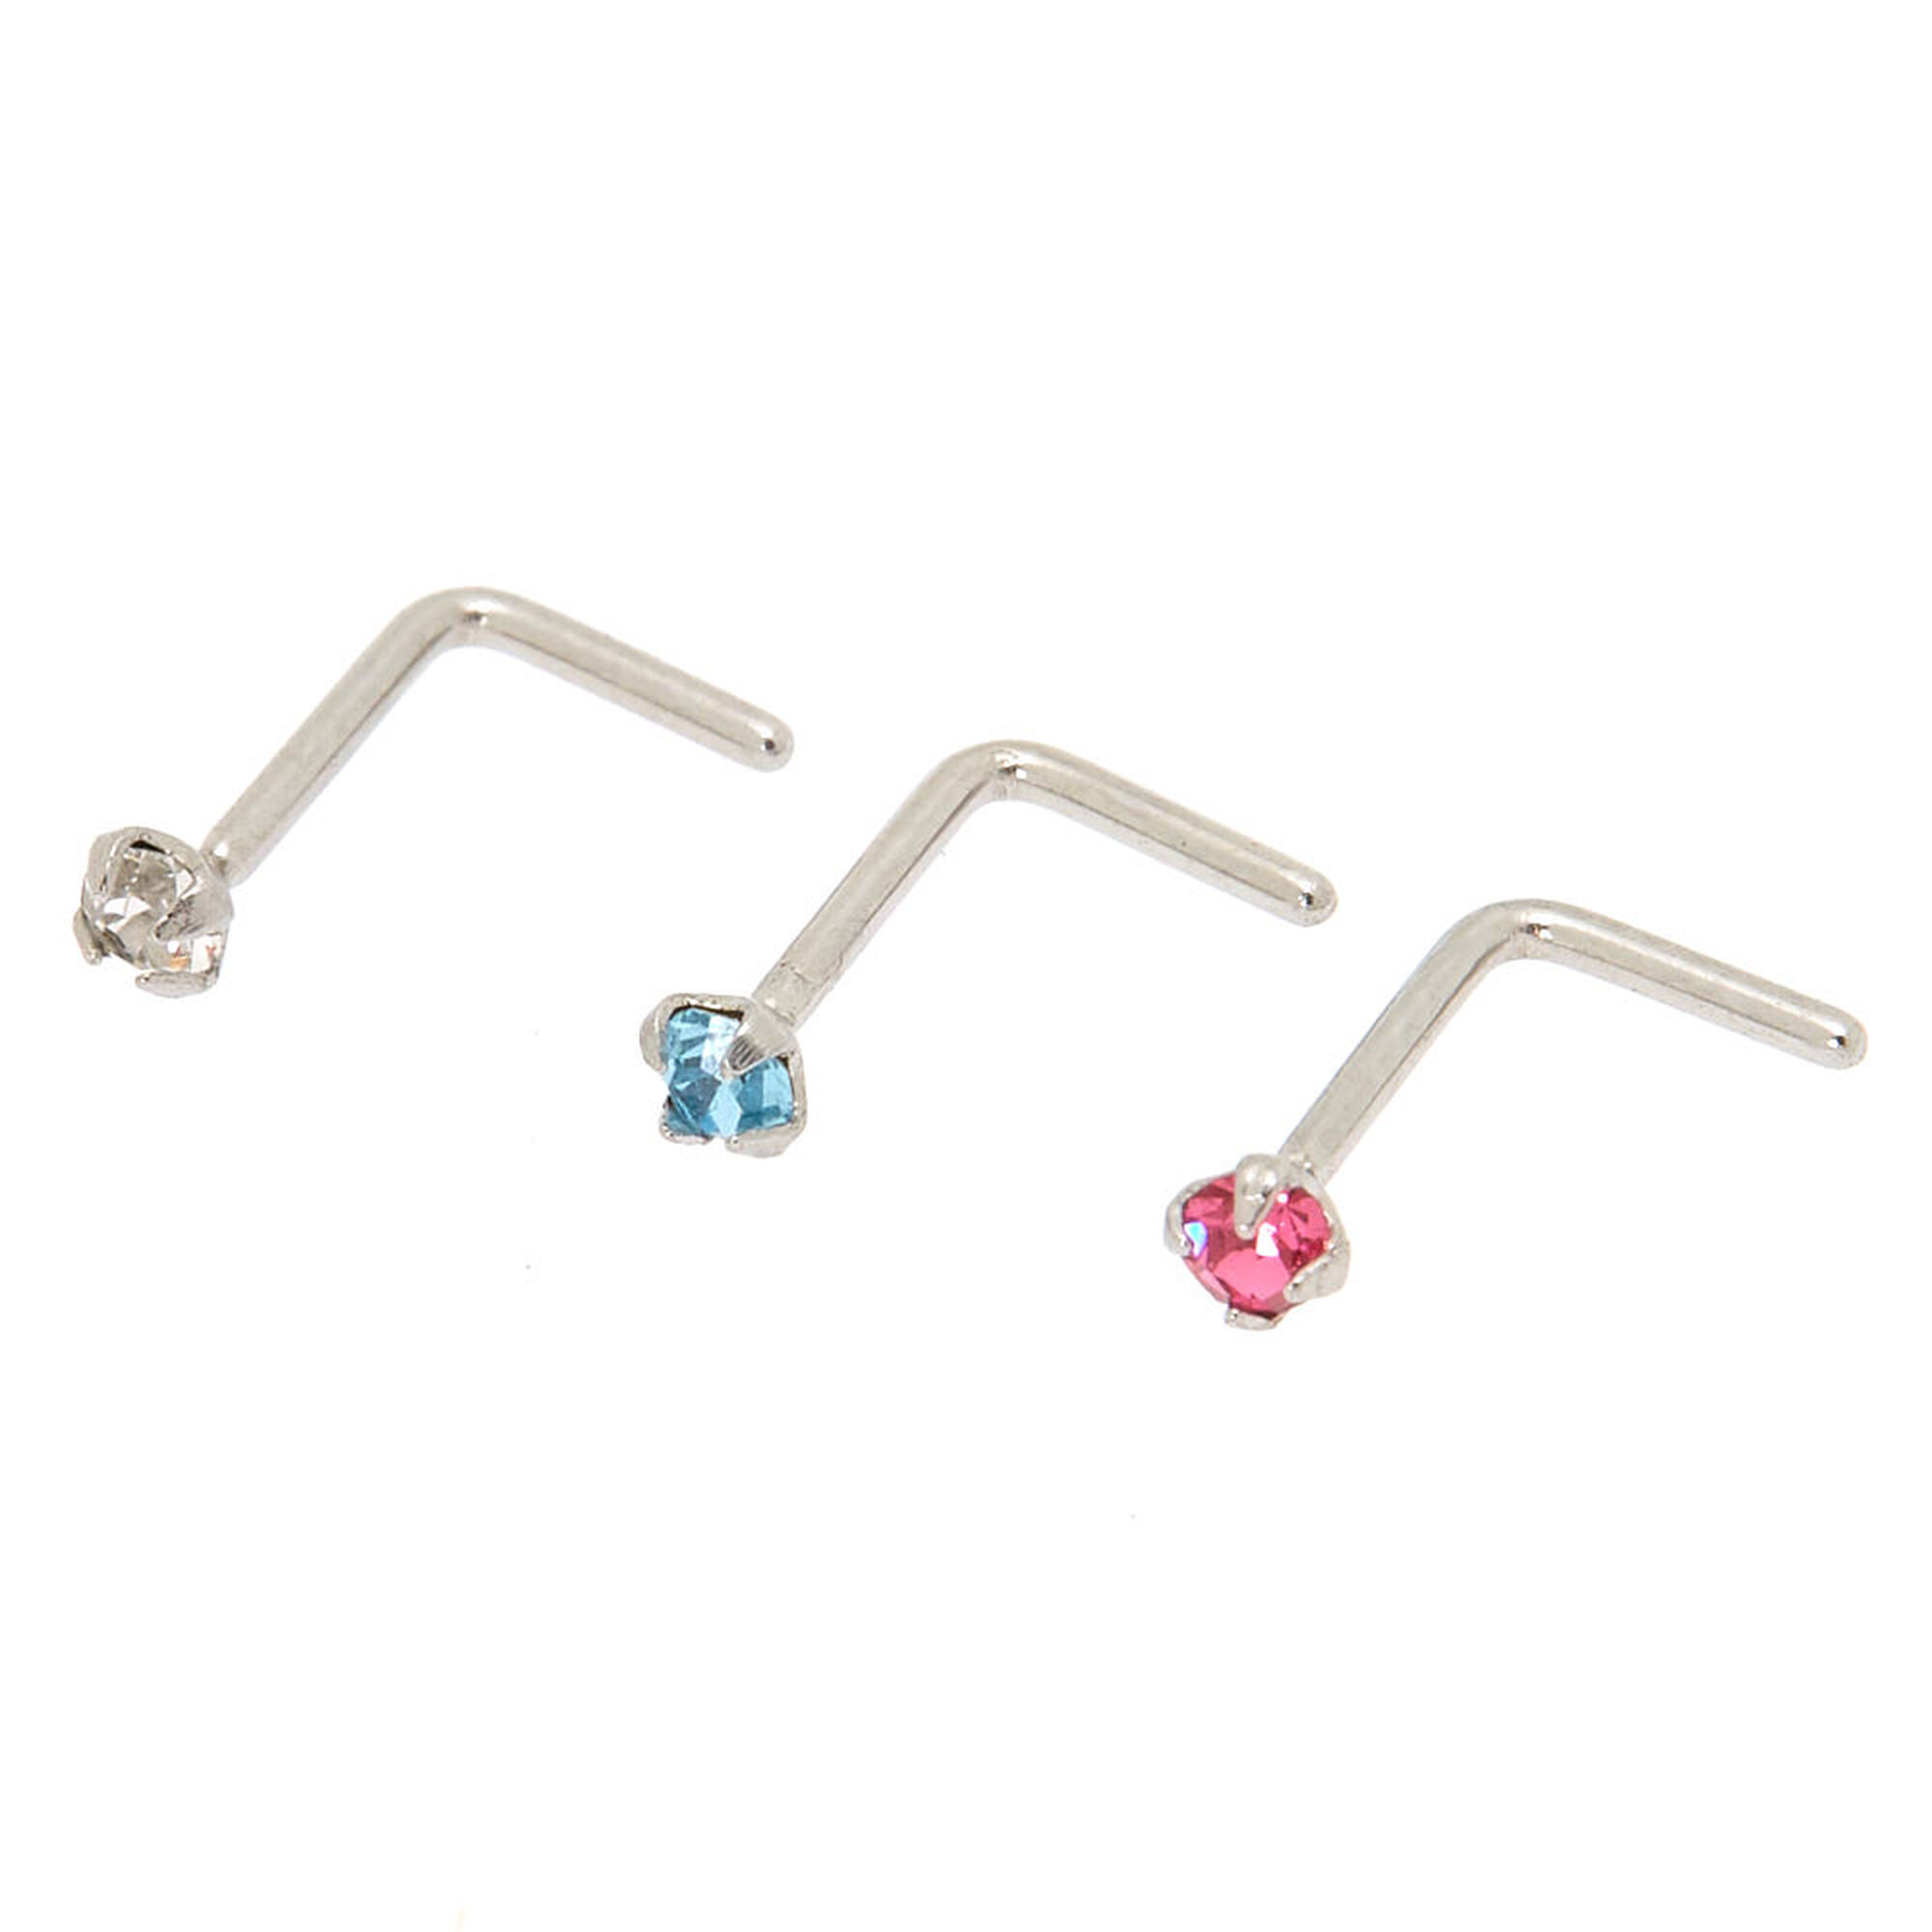 View Claires Tone 20G Pastel Nose Studs 3 Pack Silver information